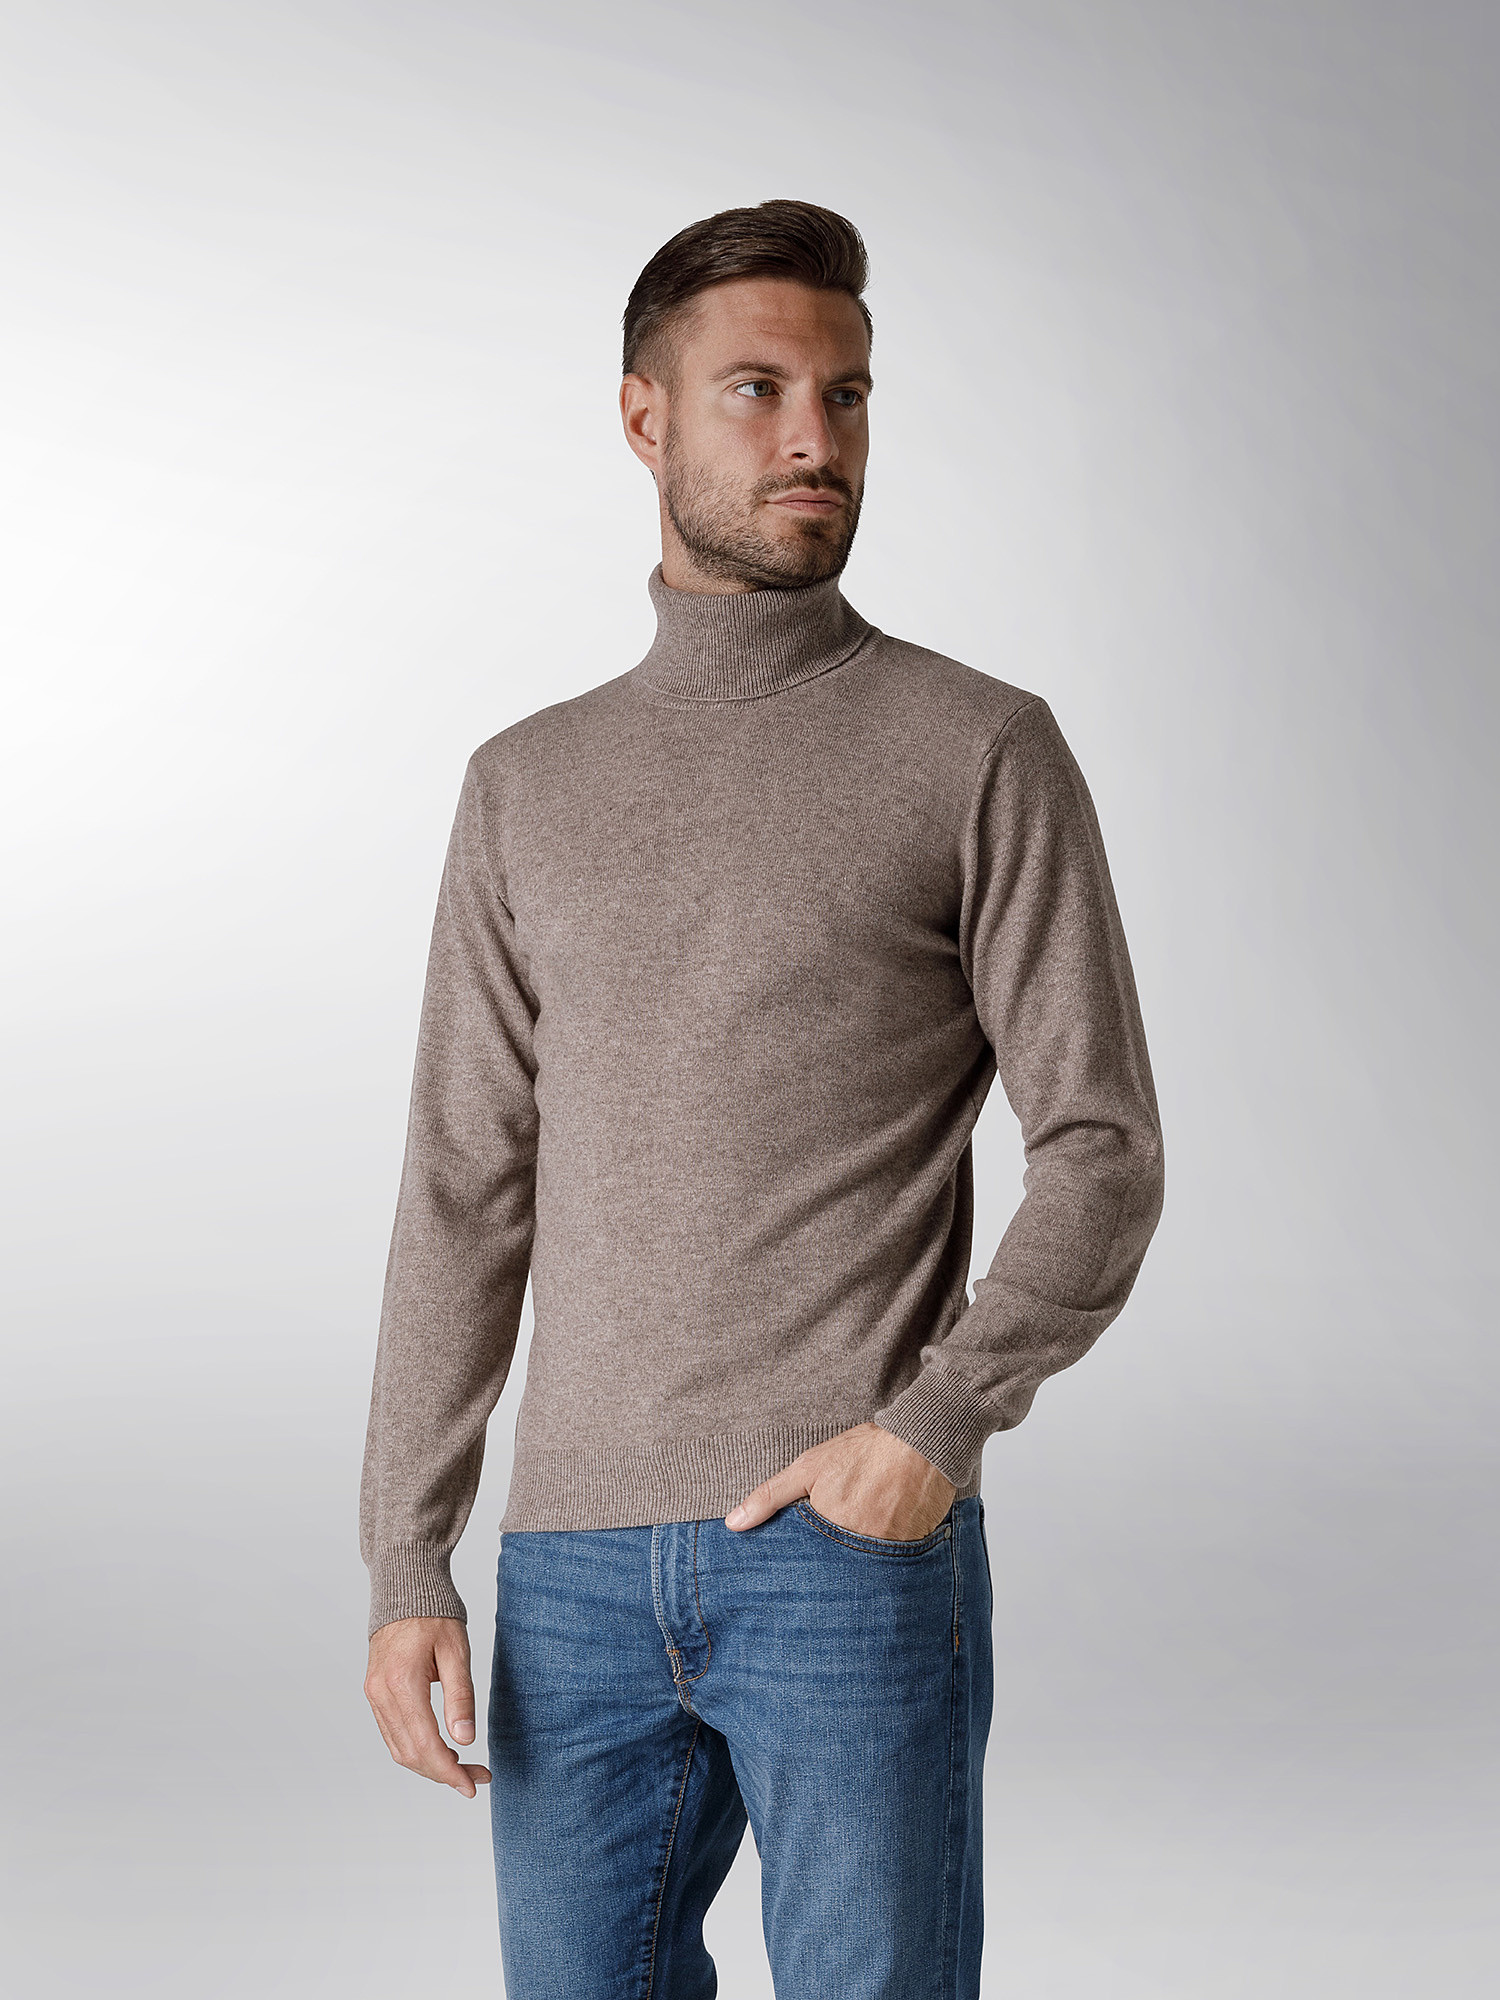 Coin Cashmere - Turtleneck in pure cashmere, Taupe Grey, large image number 1